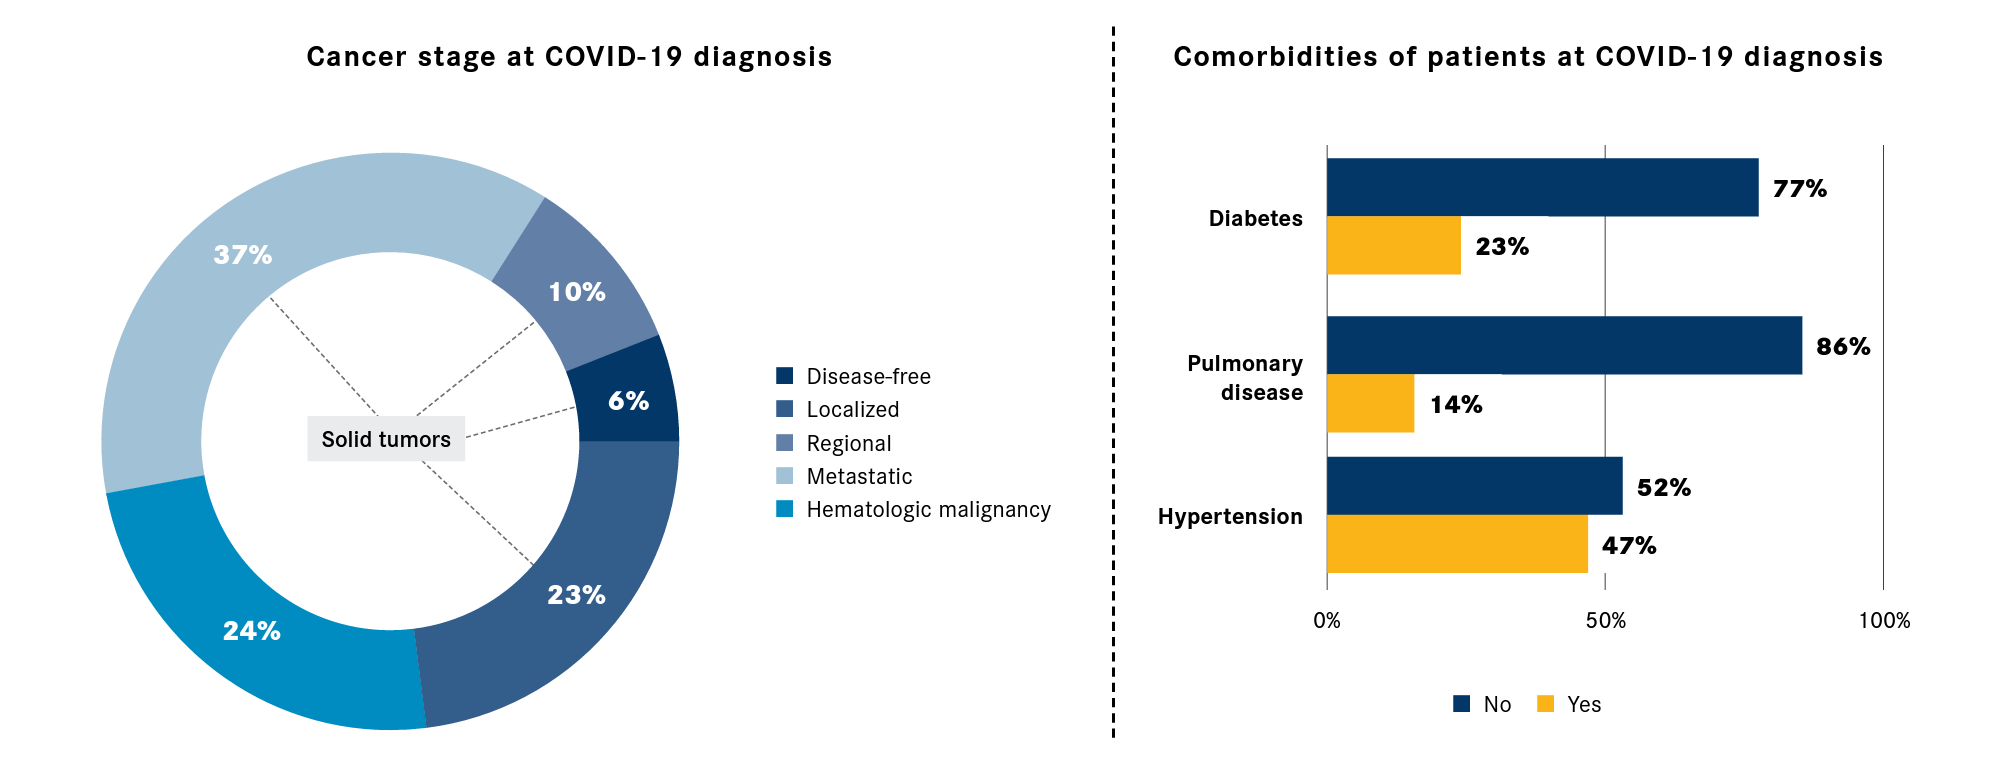 Cancer stage at COVID-19 diagnosis and comorbidities of patients at COVID-19 diagnosis